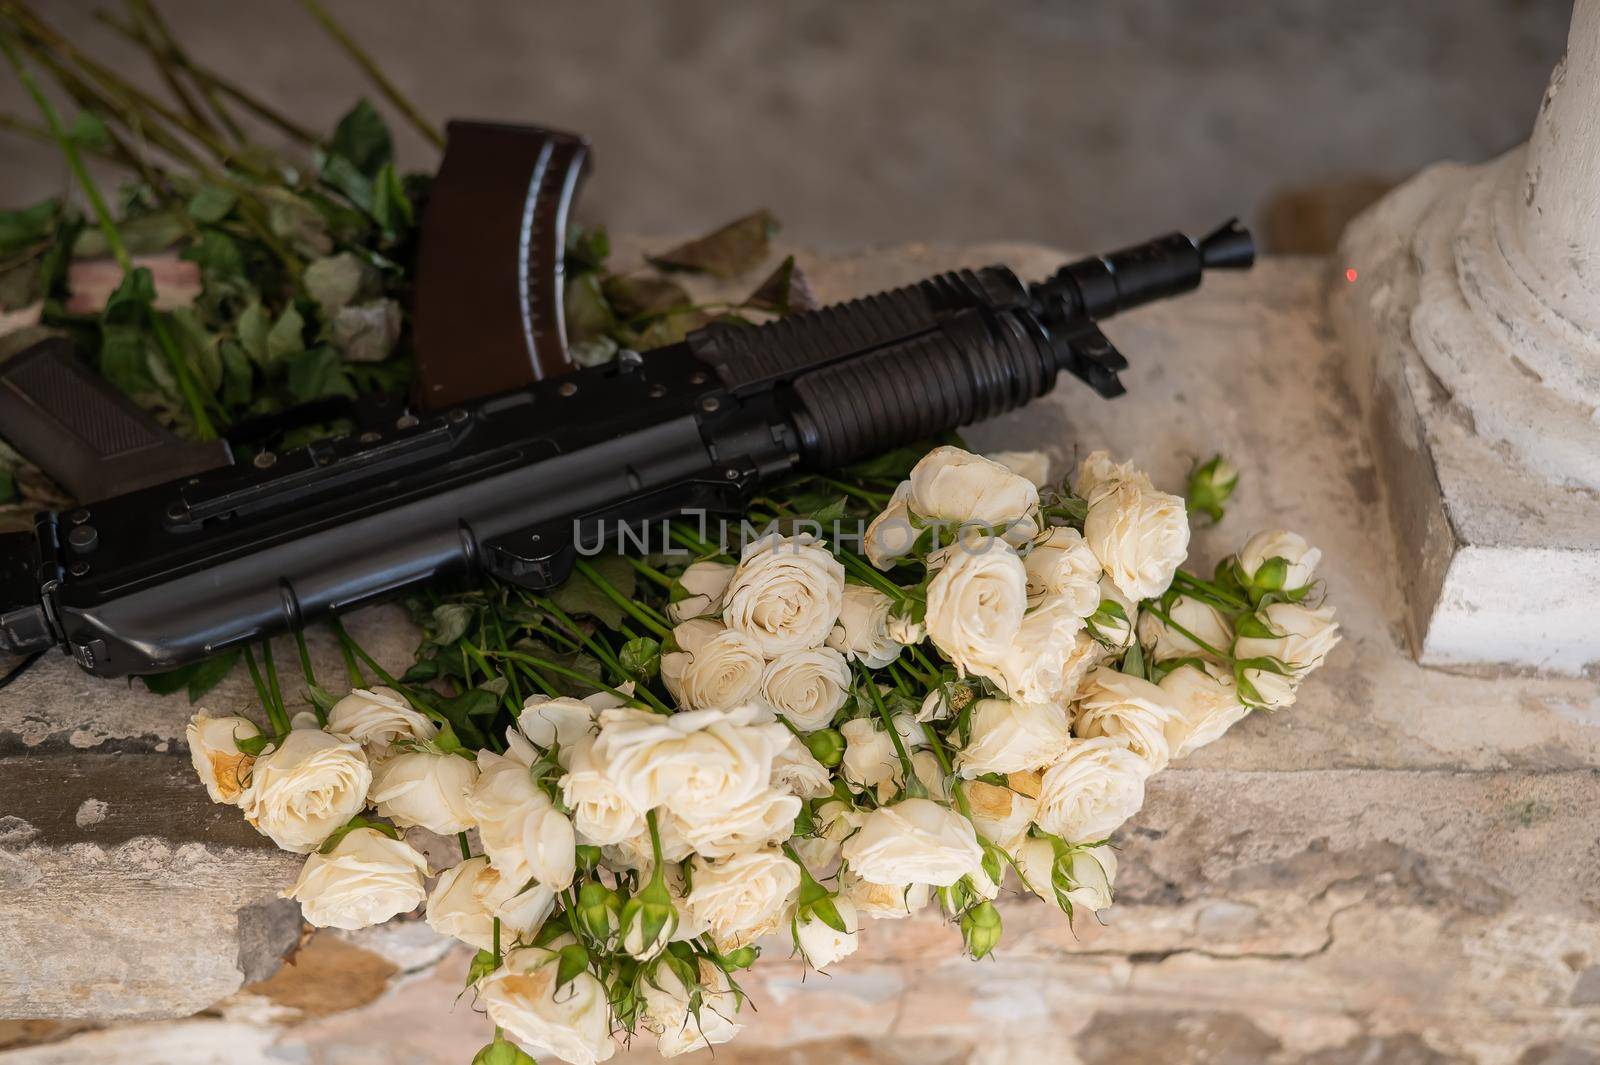 Automatic machine and a bouquet of small white roses